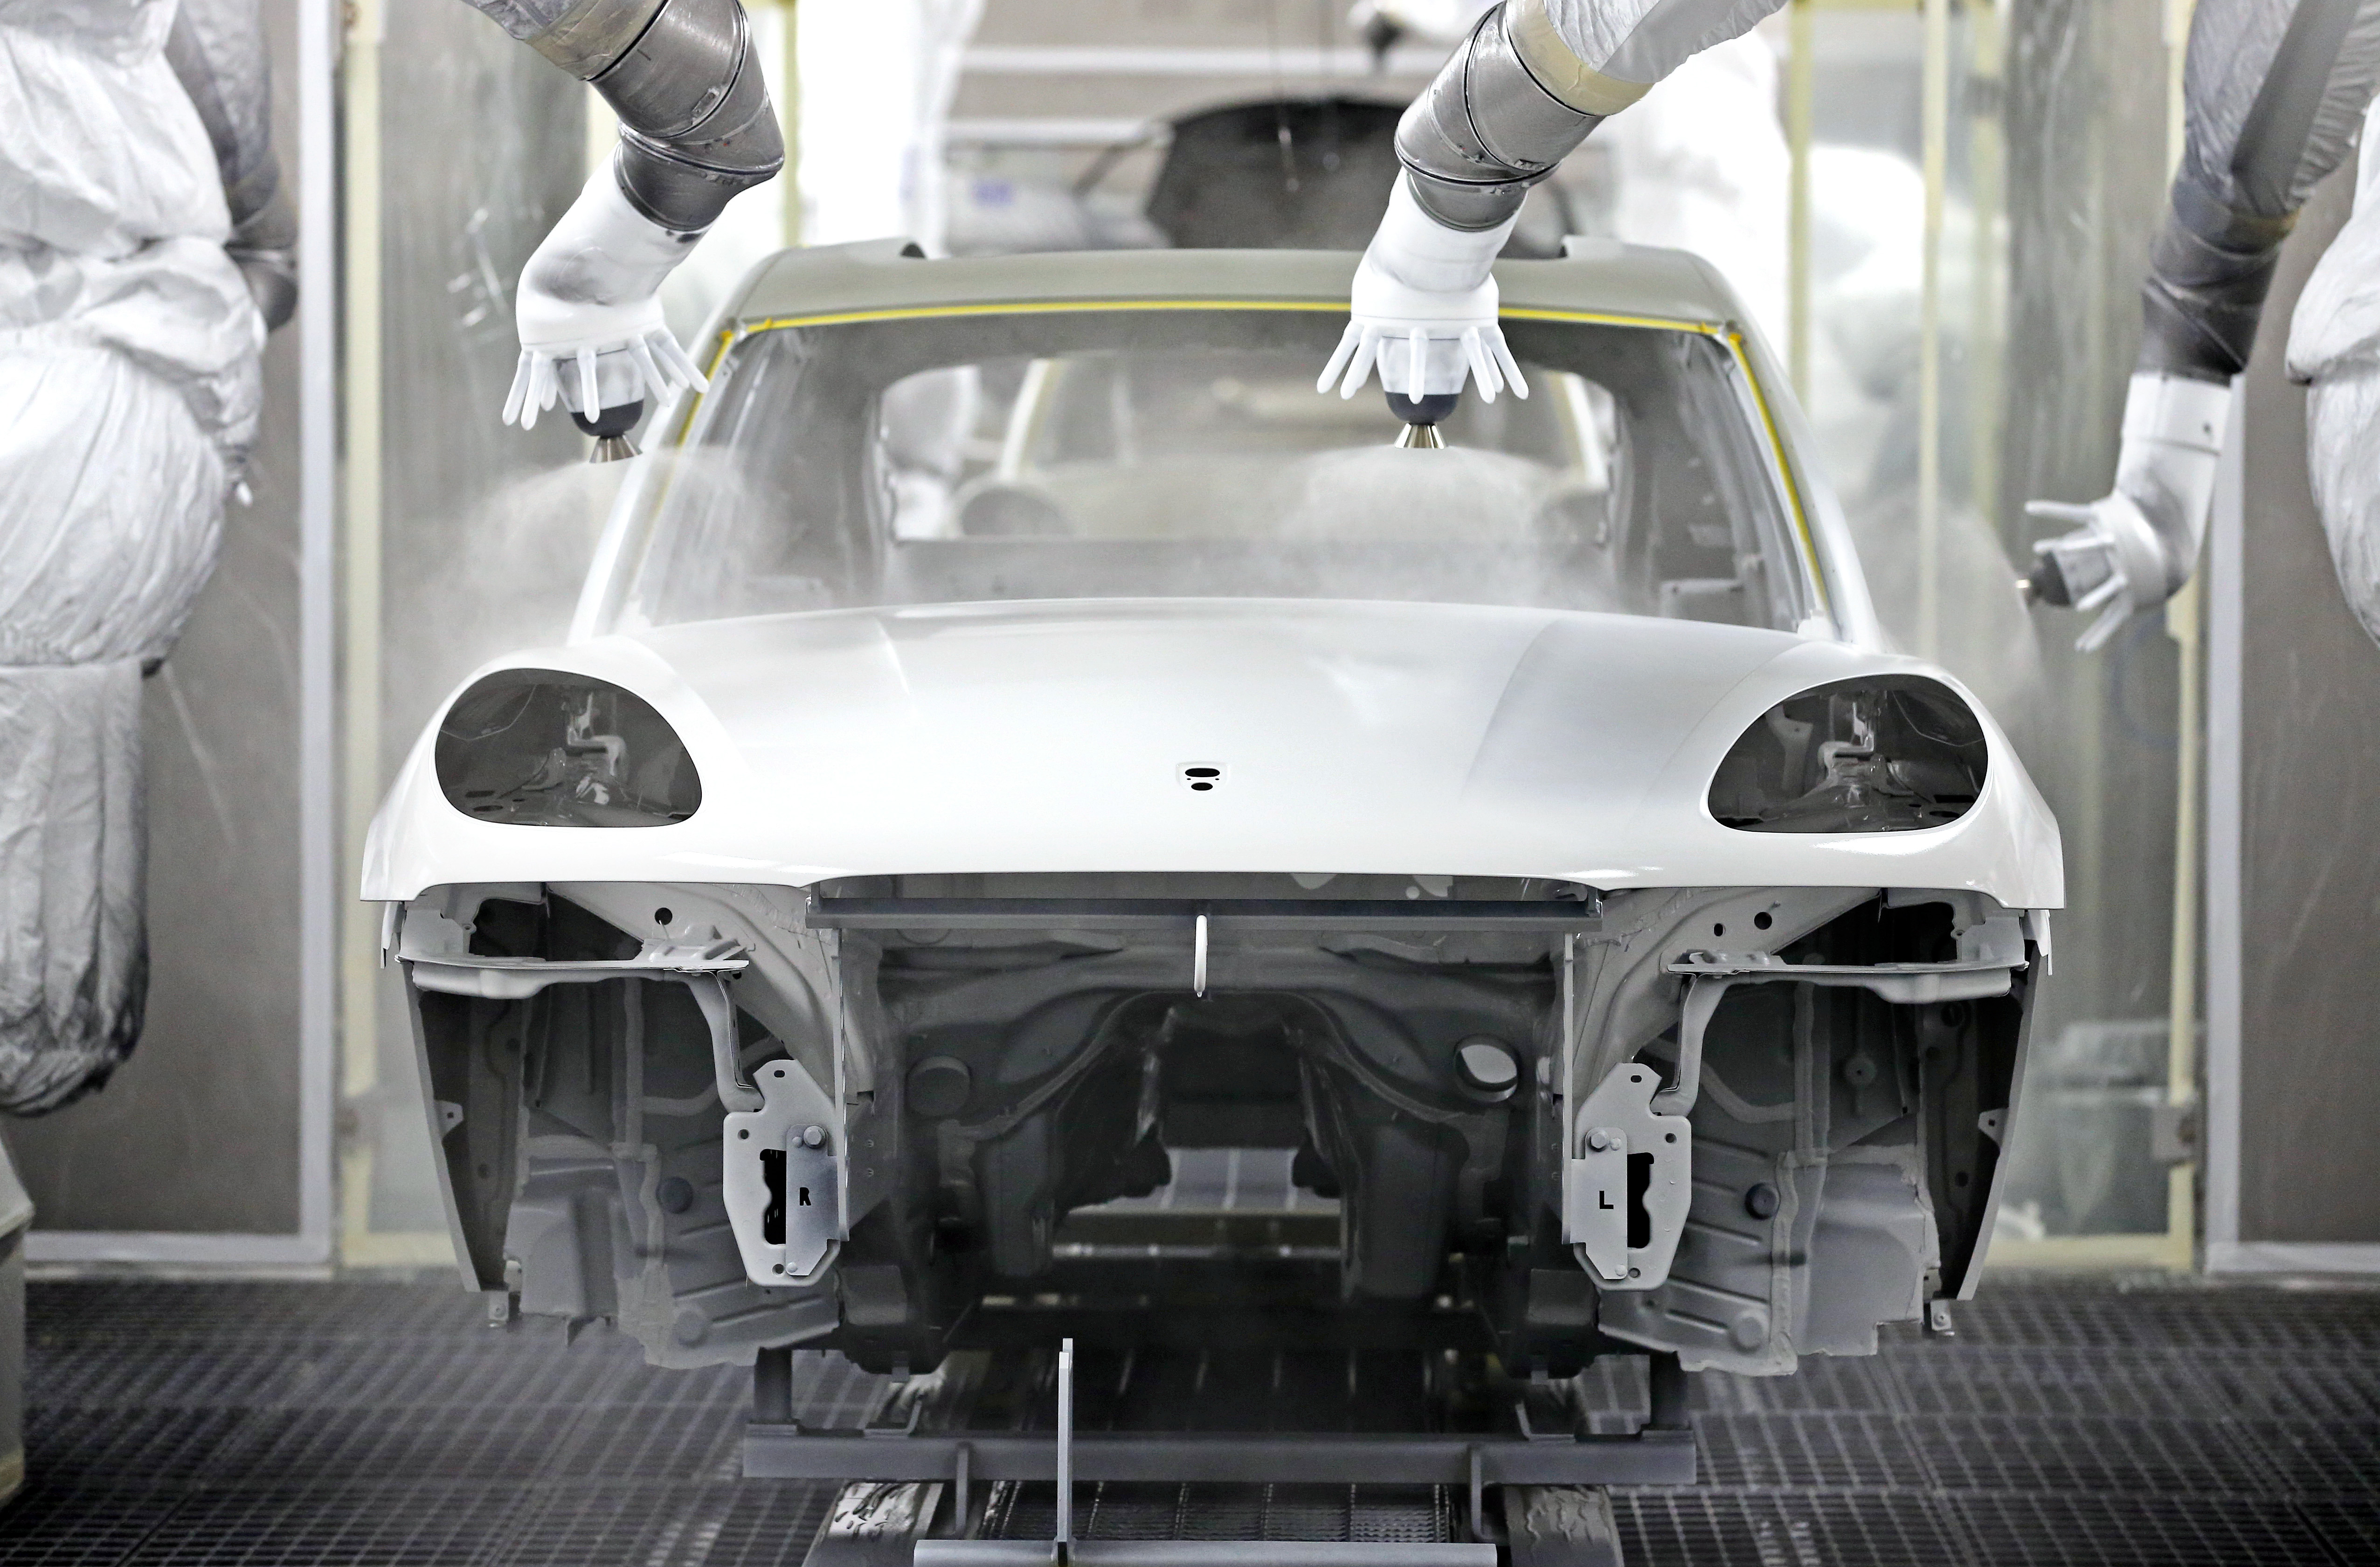 Industrial robots paint the bodywork of a new Porsche Macan at the Porsche plant in Leipzig, Germany, 05 February 2014. Car manufacturer Porsche will officially open its new Macan factory on 11 February 2014. Porsche invested 500 million euros in the expansion of its east German production location, creating 1,500 jobs. Photo by: Jan Woitas/picture-alliance/dpa/AP Images